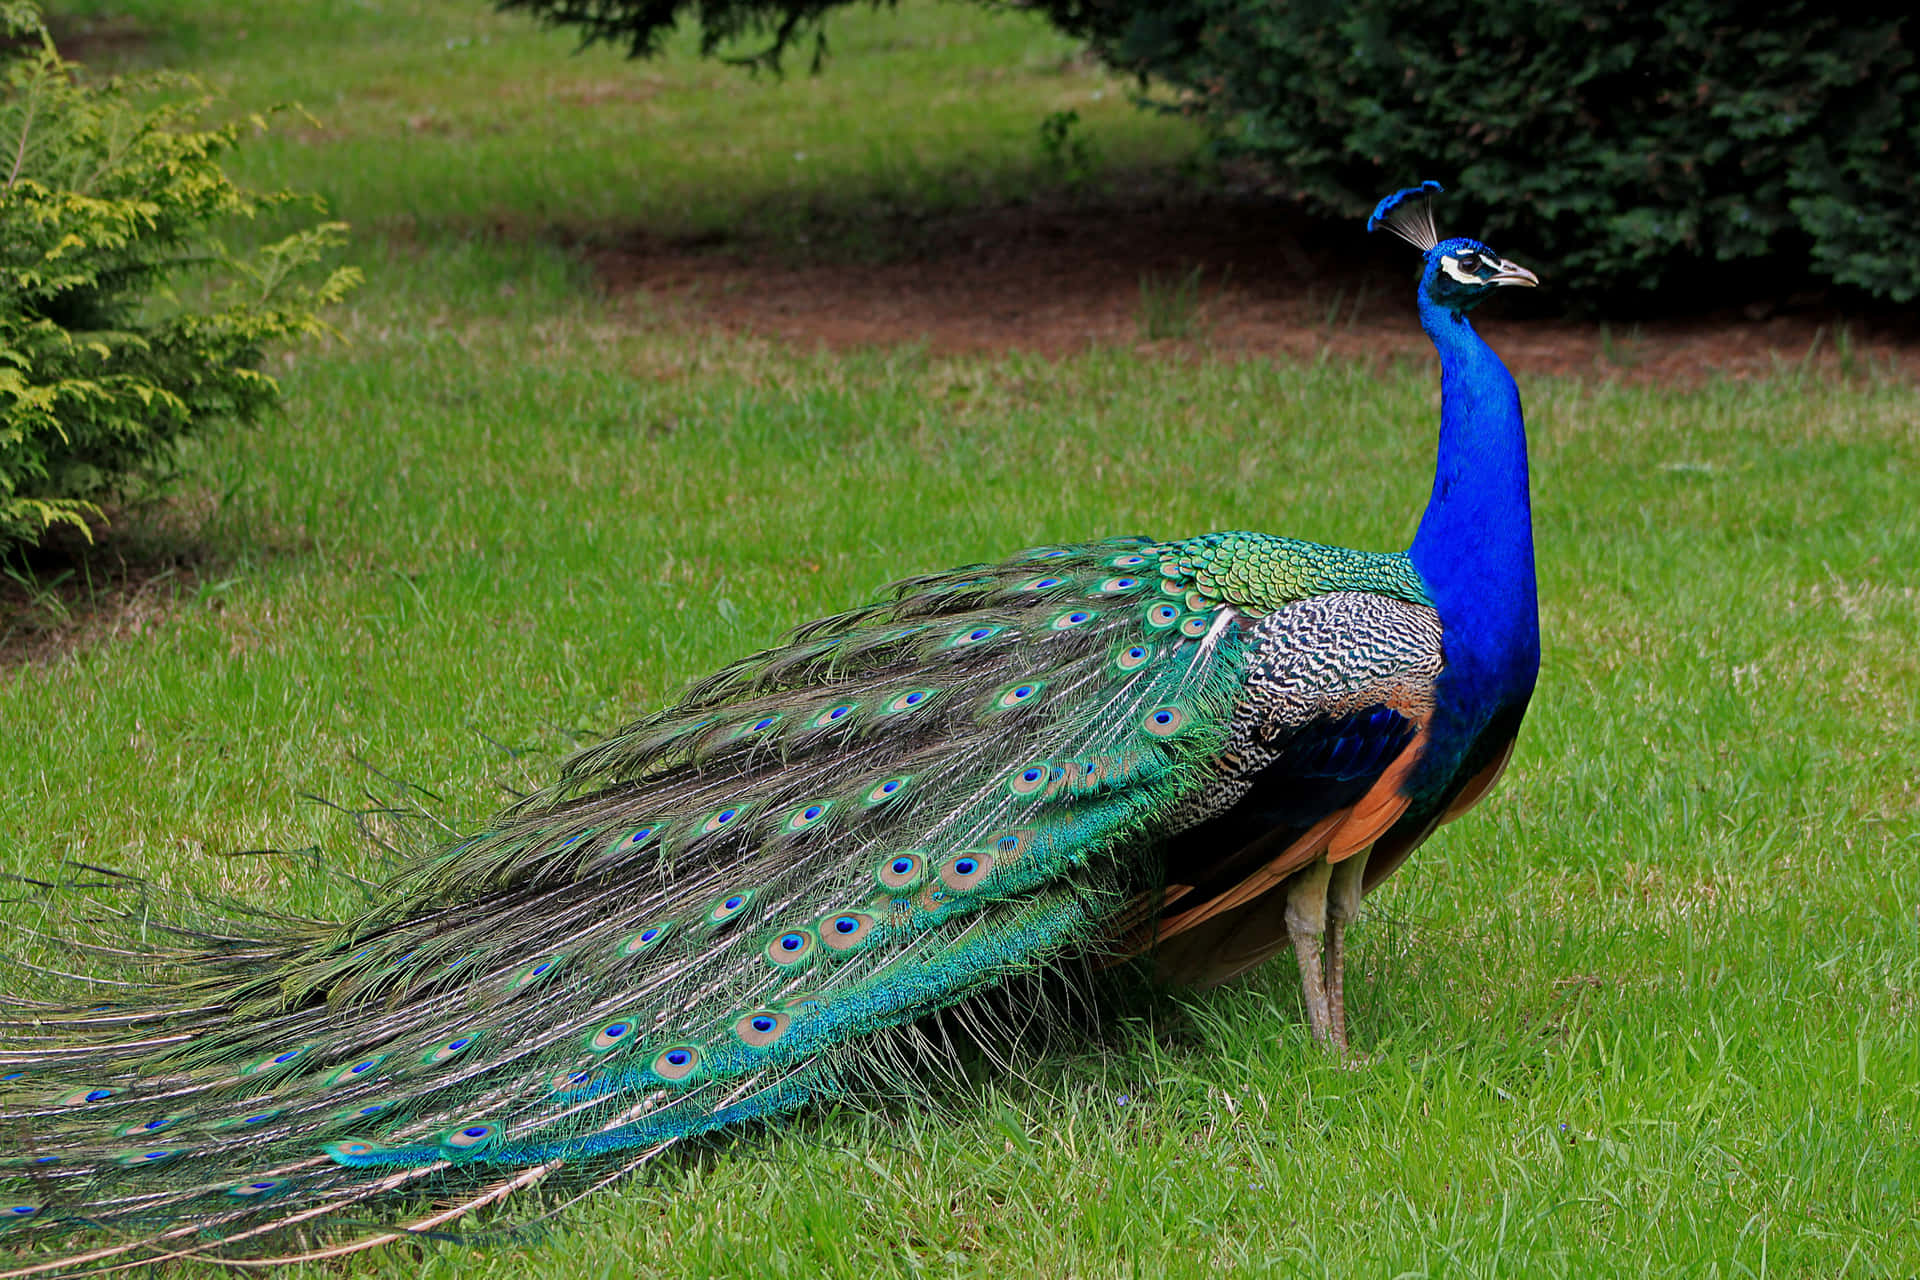 The dazzling beauty of a peacock bird